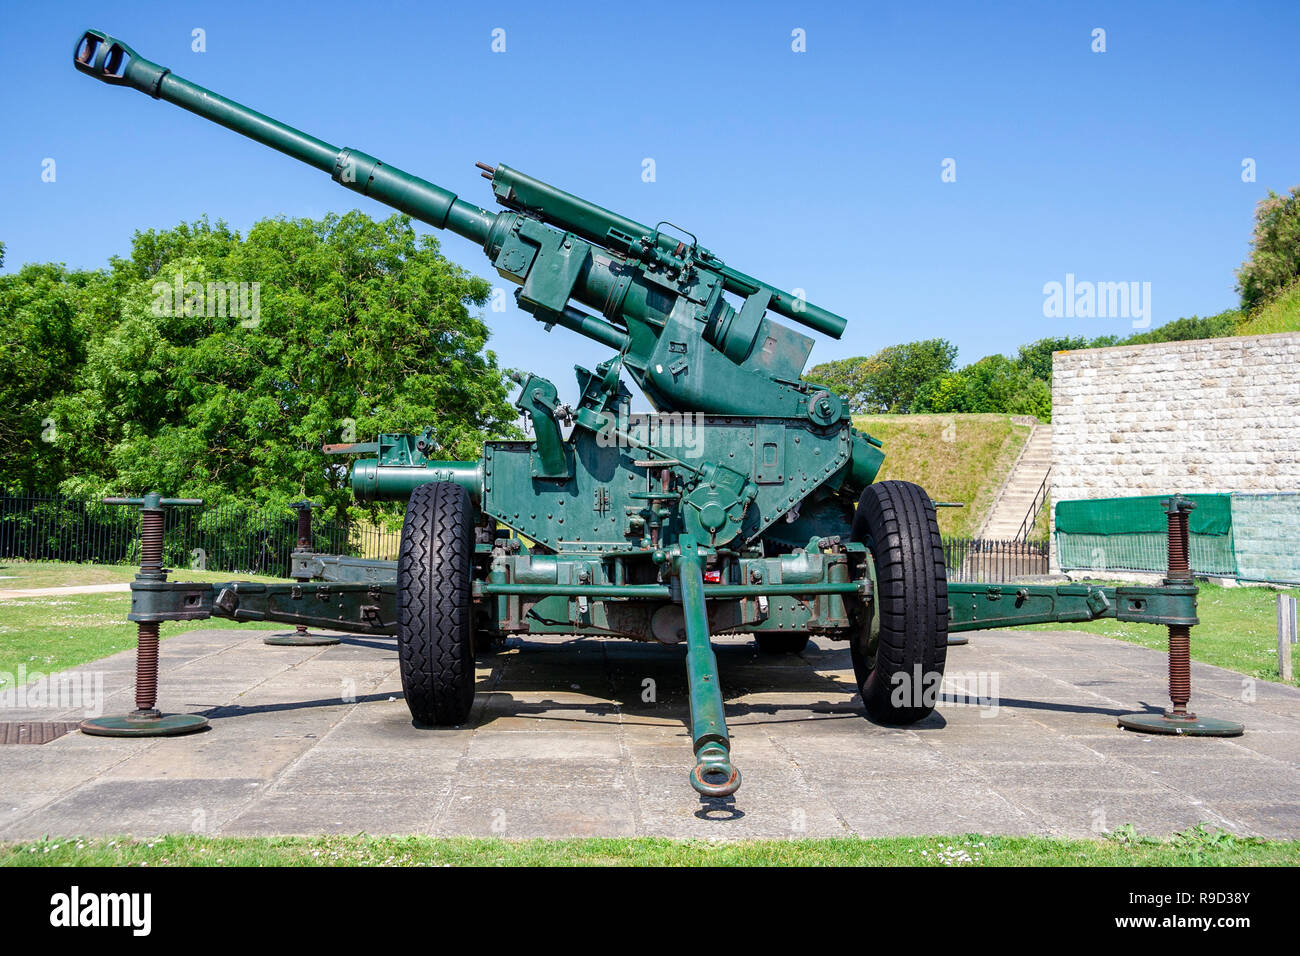 Dover castle, England. World war two anti-aircraft gun on carriage, Vickers QF 3.7 inch mobile gun. Daytime, blue sky. Stock Photo